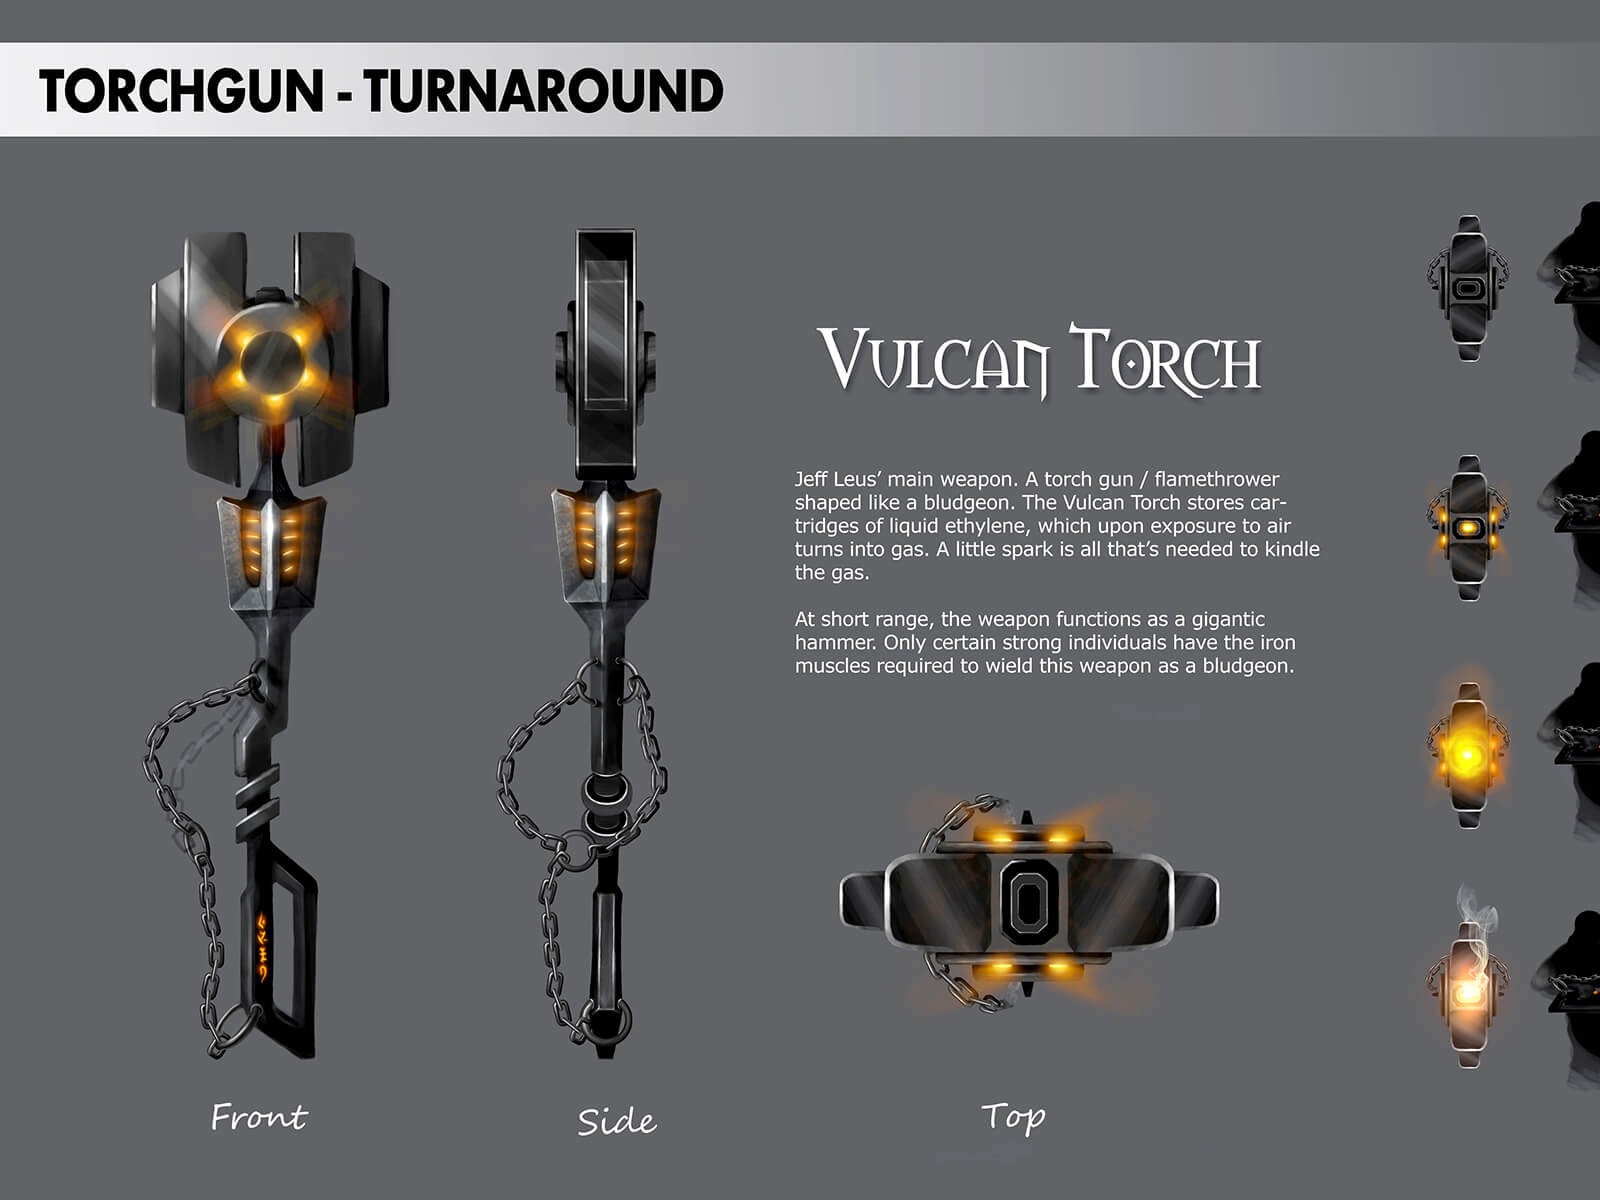 Concept art turnaround of a long, dual-handed flamethrower implement called "Vulcan Torch" in various states of use.